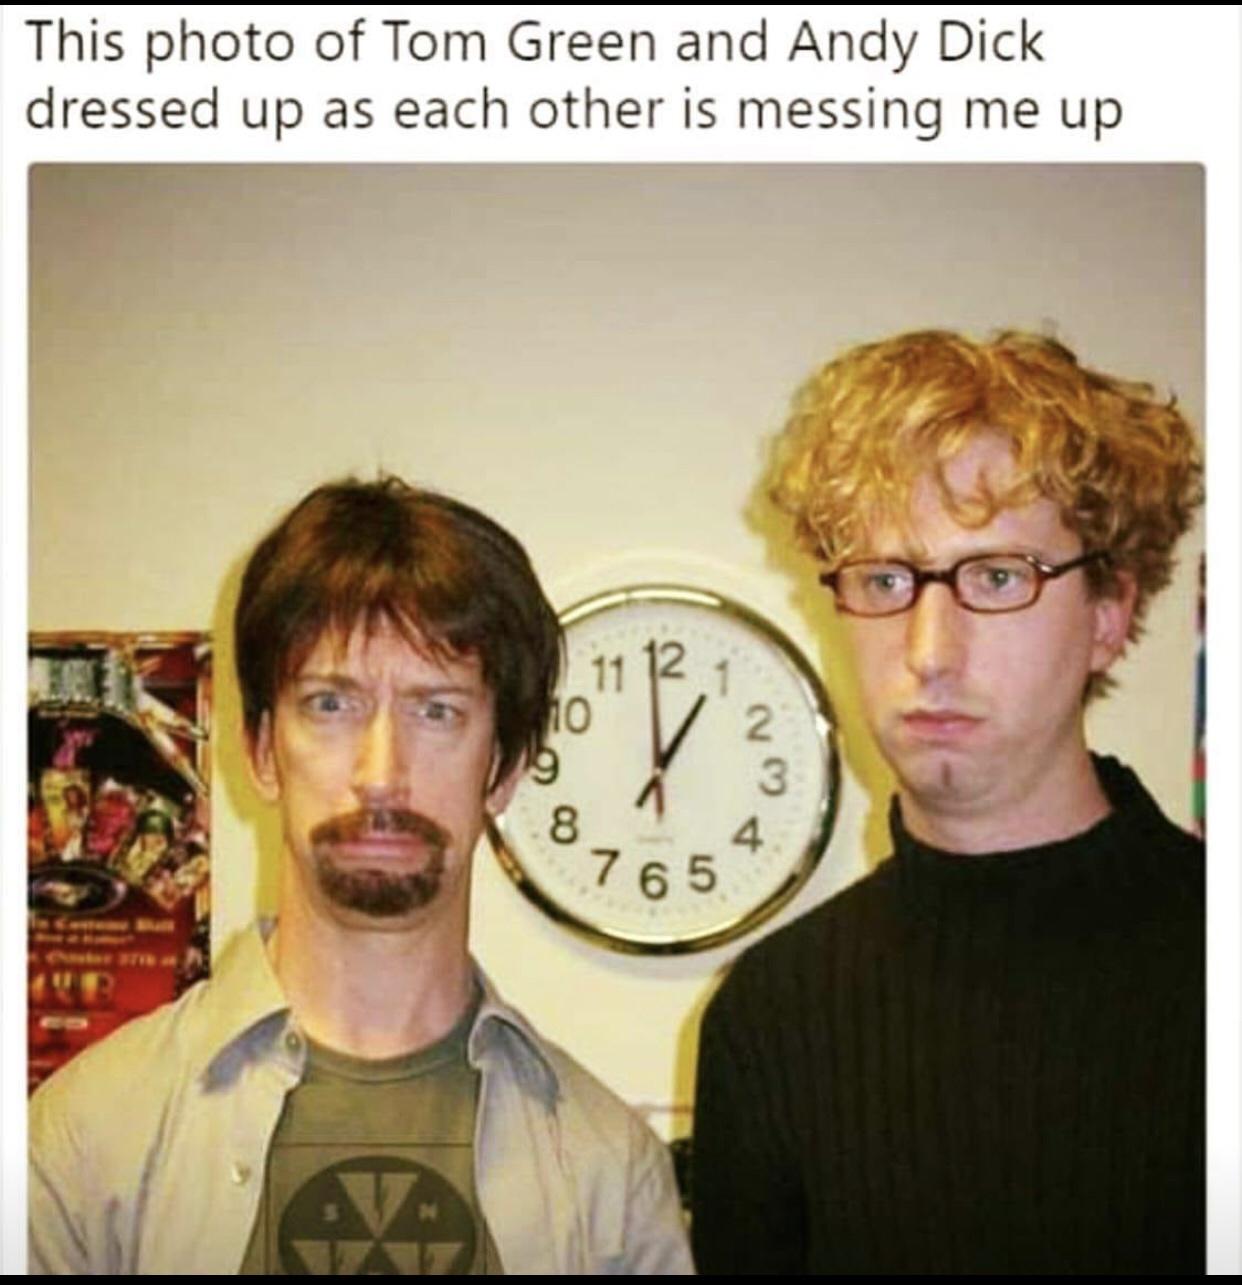 tom green andy dick - This photo of Tom Green and Andy Dick dressed up as each other is messing me up 11 10 2 3 X 8 765 4